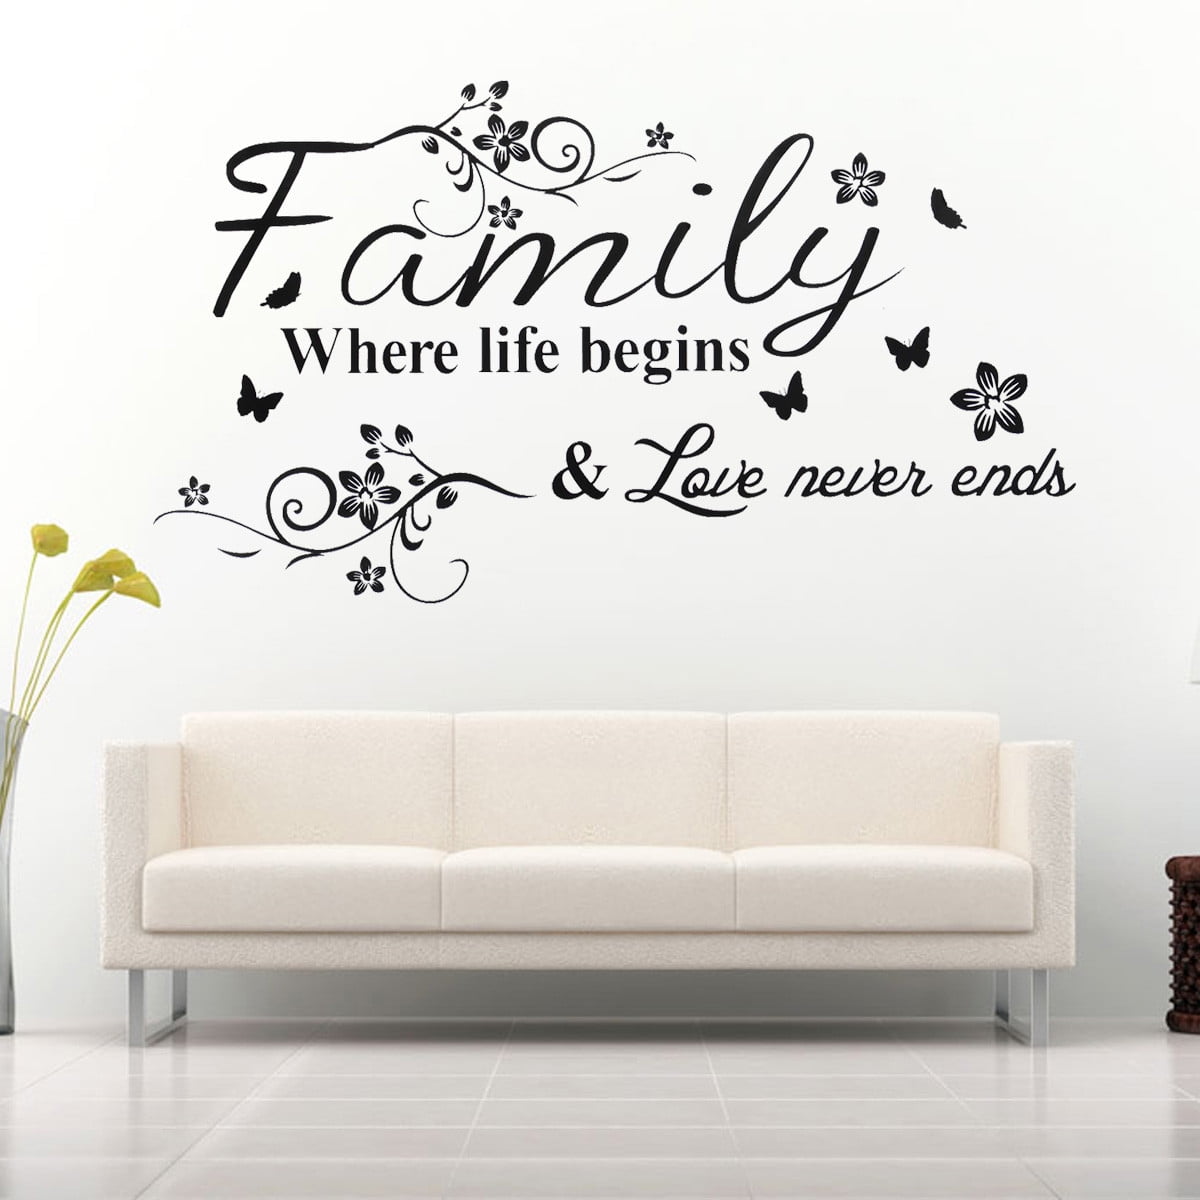 Before Leaving Quote Vinyl Wall Stickers Living Room Home Decor Self Adhesive CB